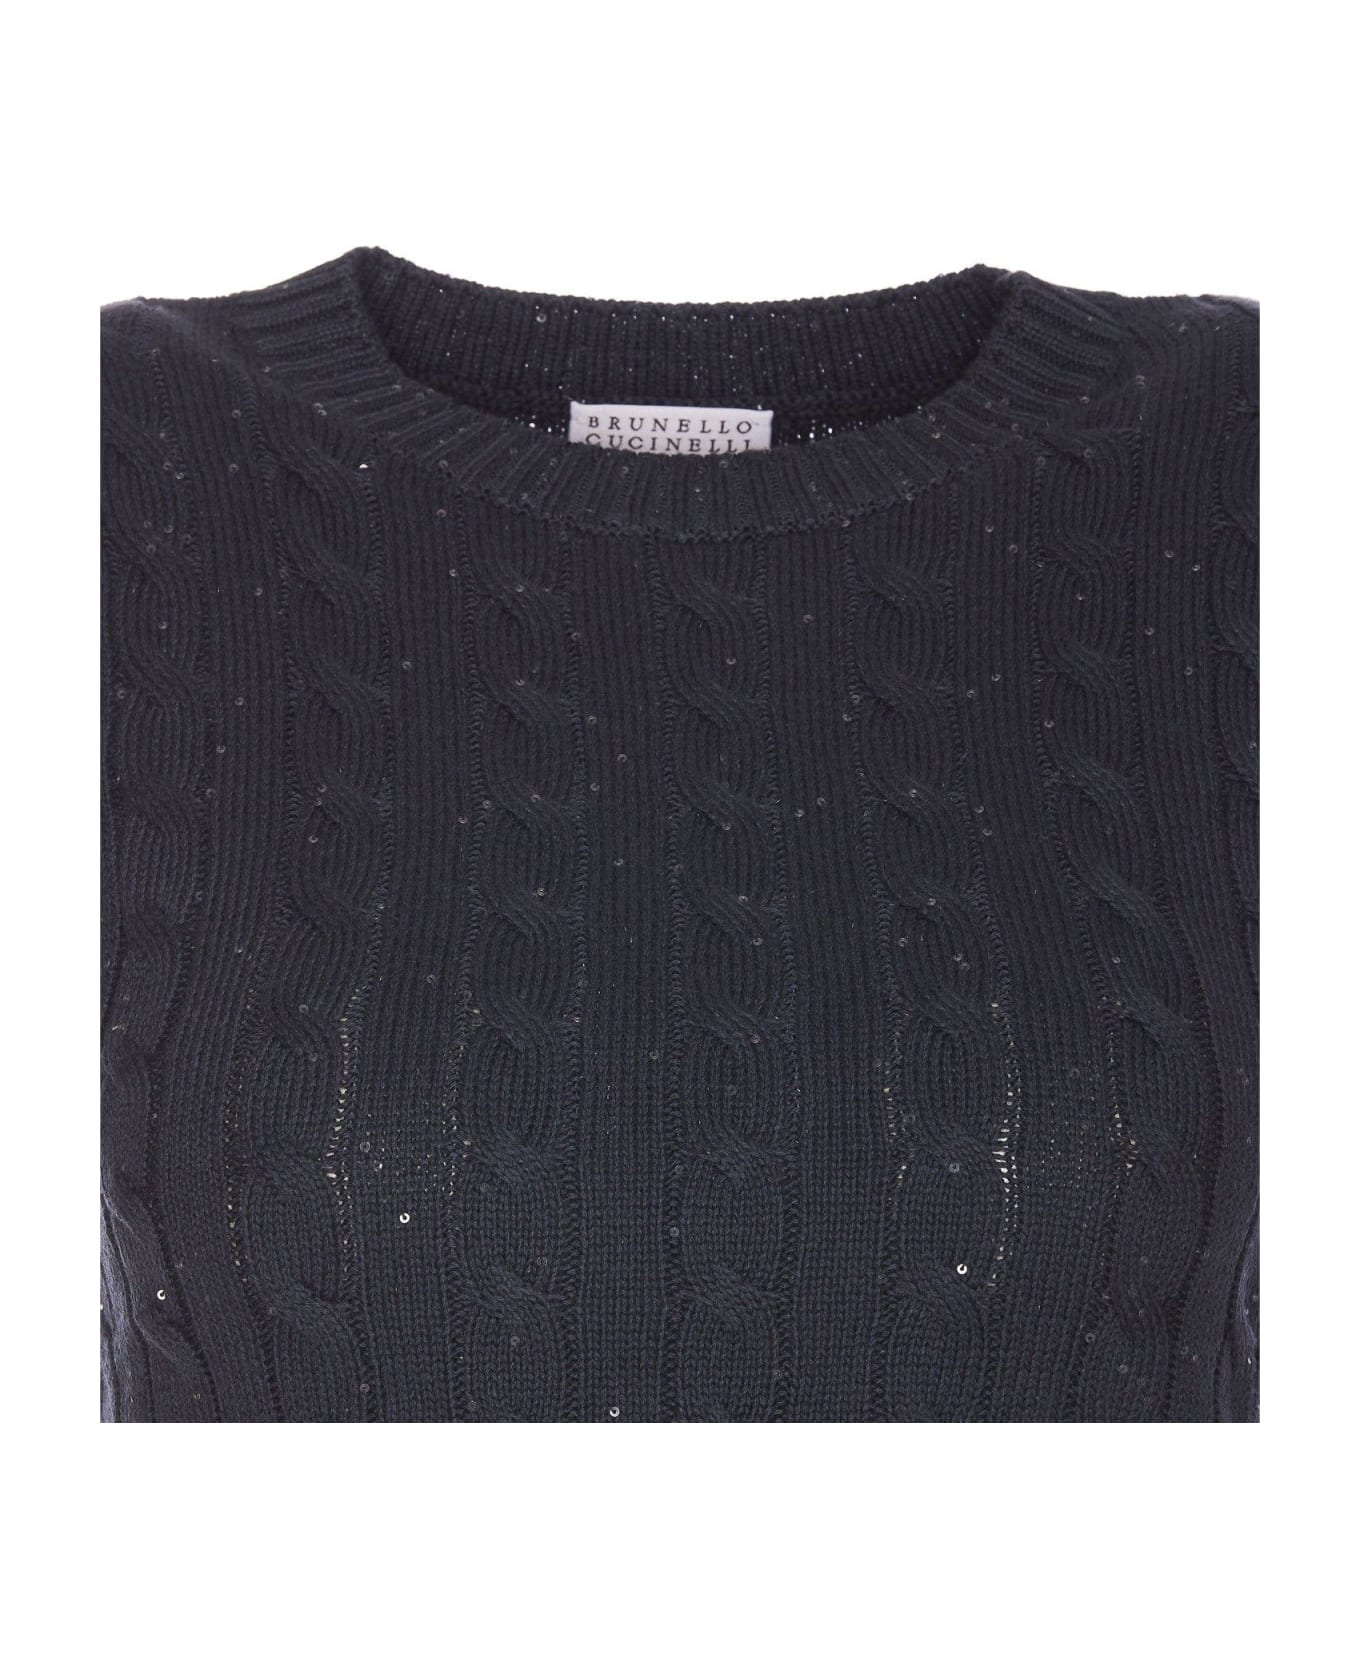 Brunello Cucinelli Sequin Embellished Cable-knitted Top - BLACK